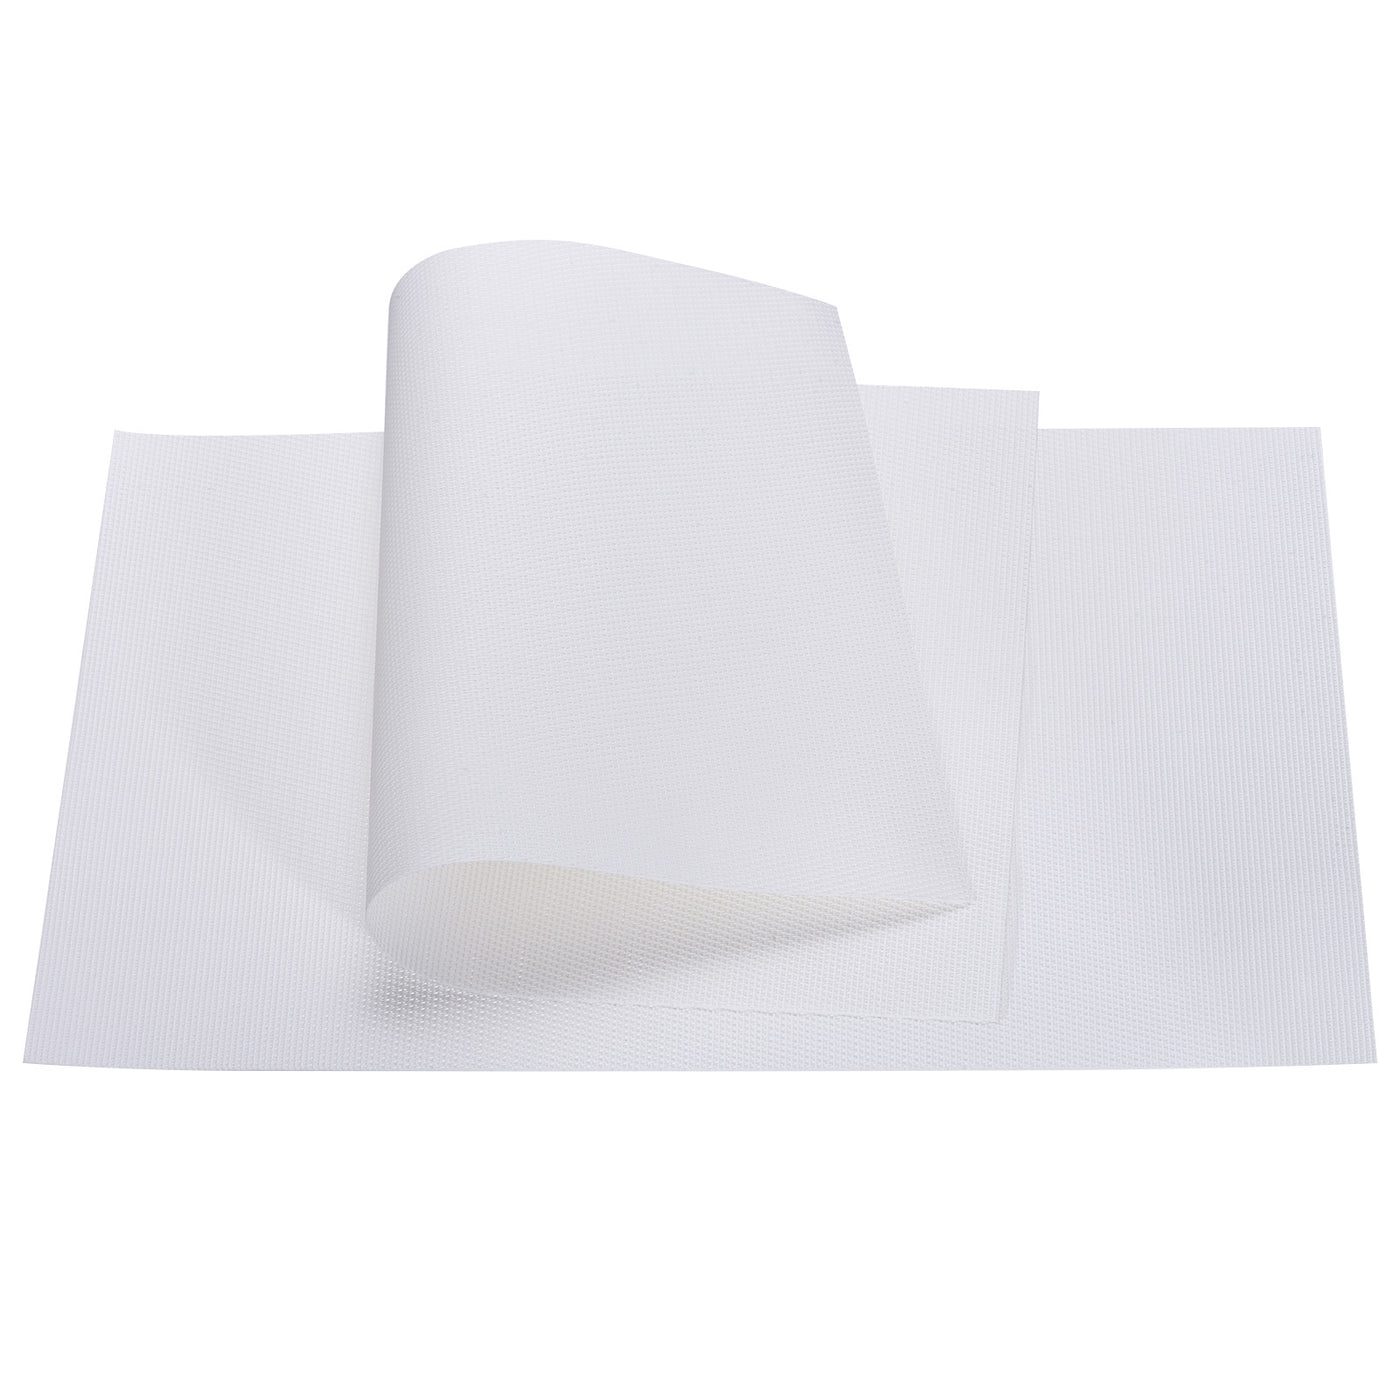 uxcell Uxcell Place Mats 450x300mm 6pcs PVC Table Washable Woven Placemat, White